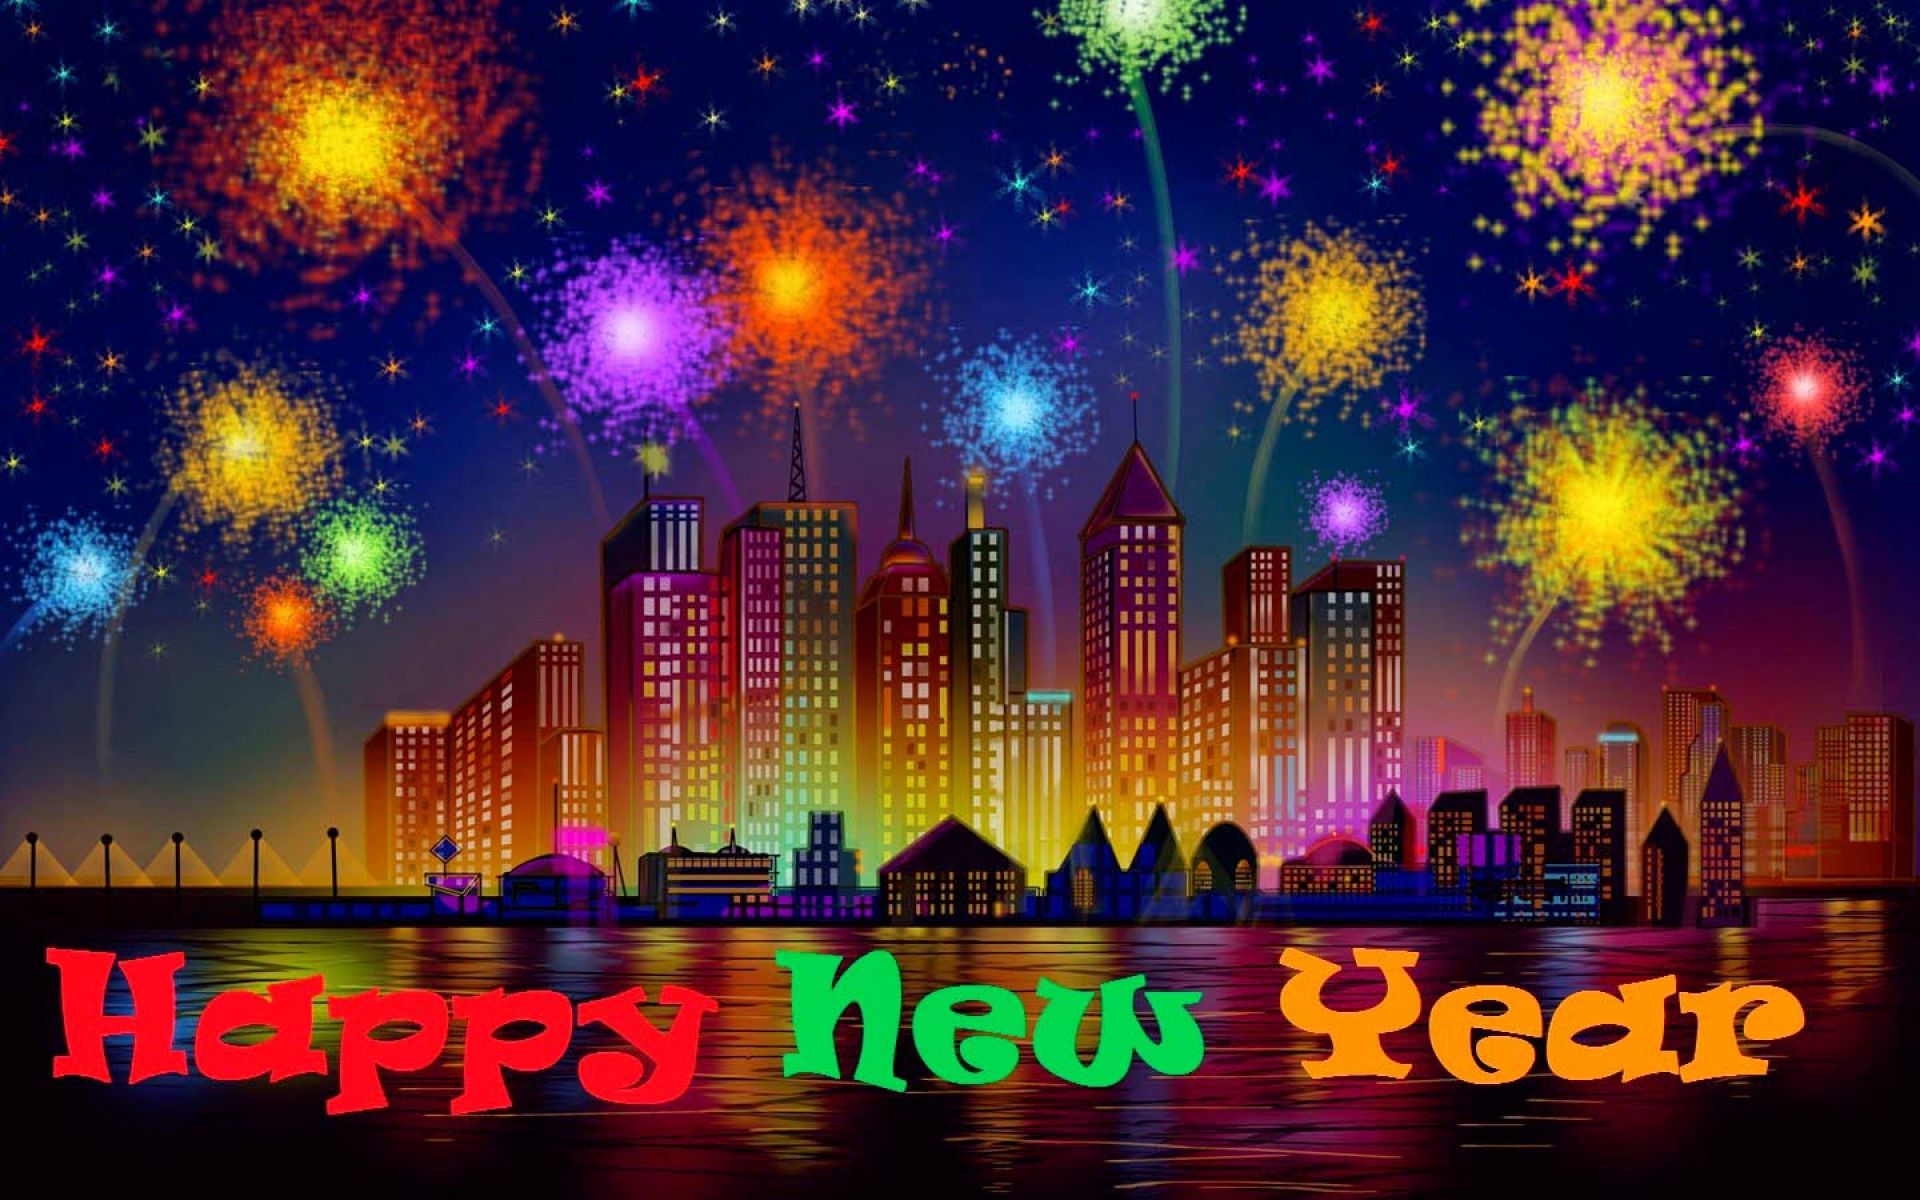 Happy New Year Fireworks Image Wallpaper Wallpaper - Happy New Year Editing Background - HD Wallpaper 